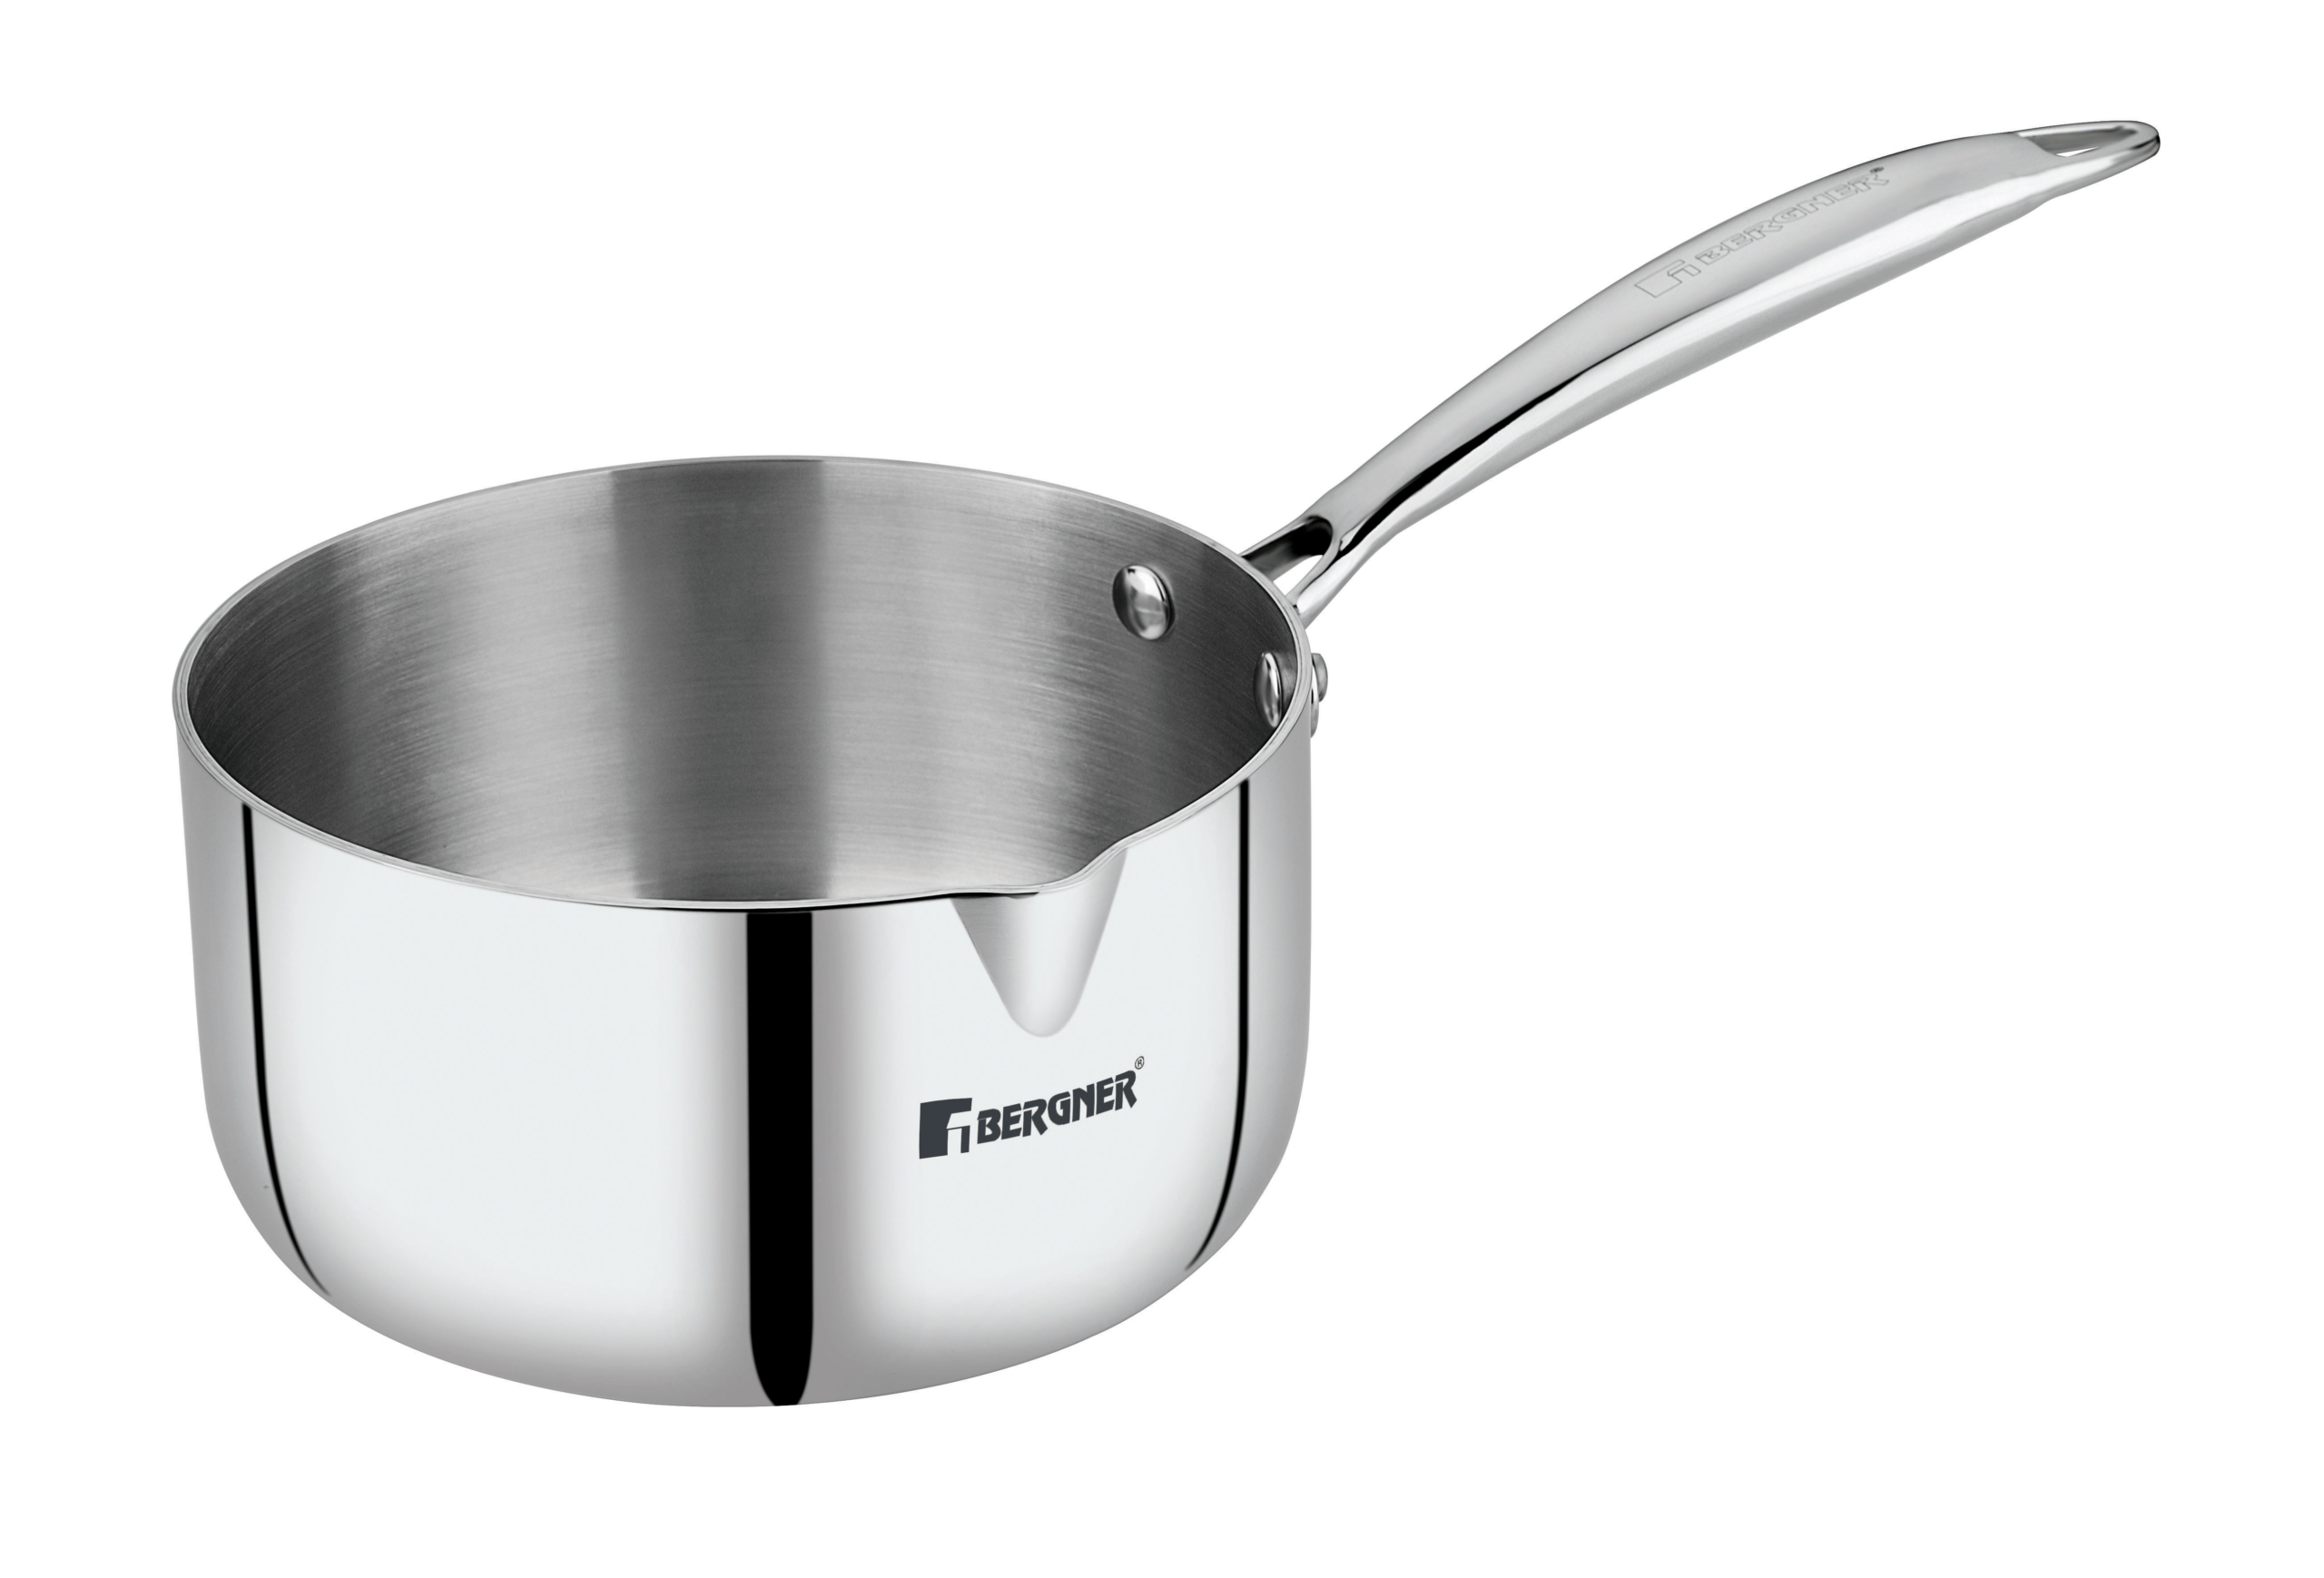 16 cm Saucepan, 22 cm Kadai with Lid and 22 cm Frypan - Bergner Triply Stainless Steel 4Pc Cookware Set Online